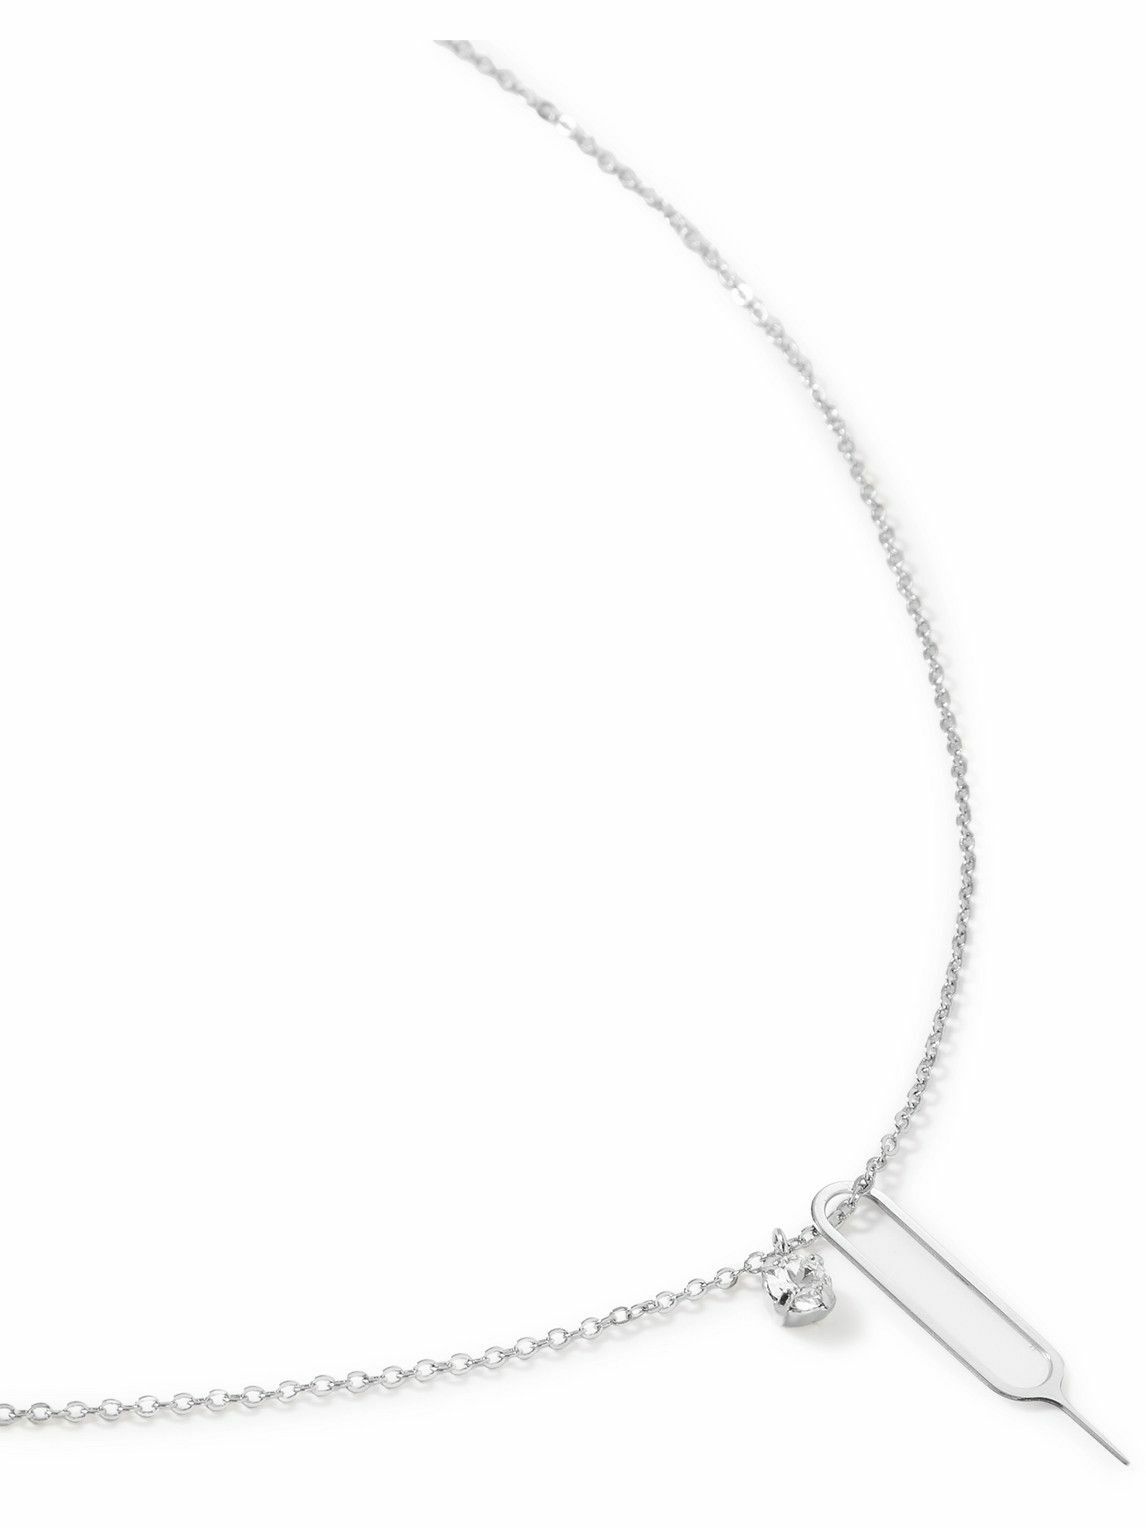 Saint Laurent 2017 Silvertone Razor Blade Necklace with Box at